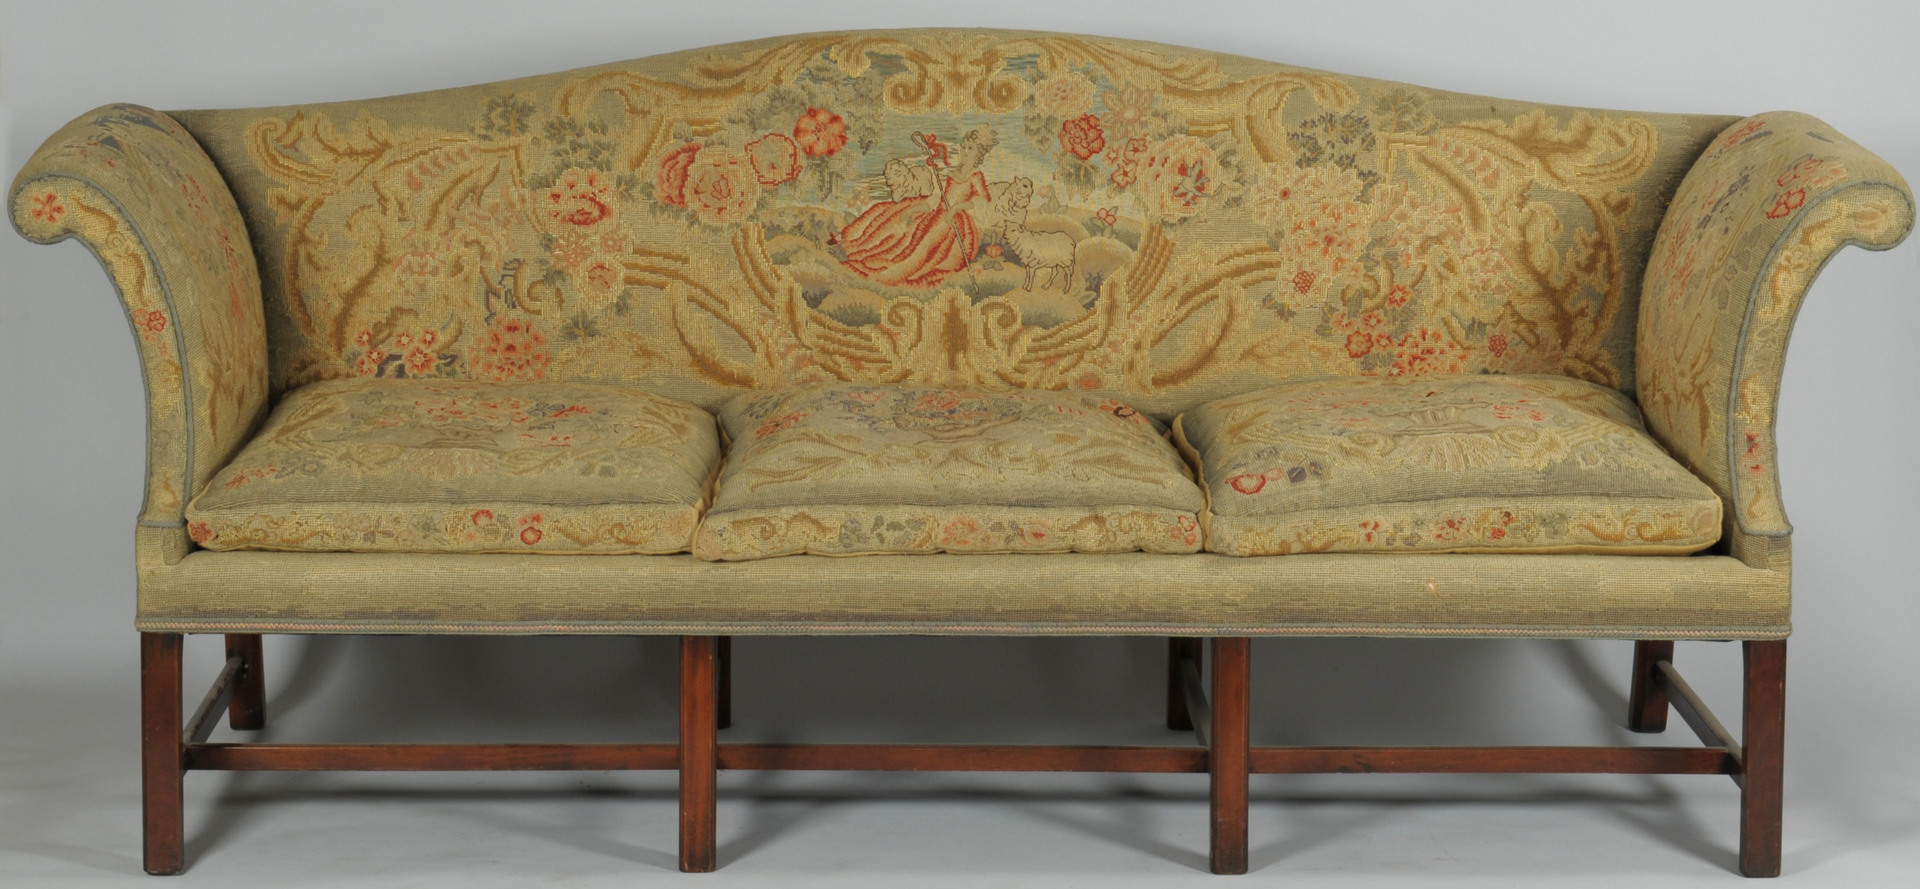 Lot 314: Chippendale Style Sofa w/ Tapestry Upholstery